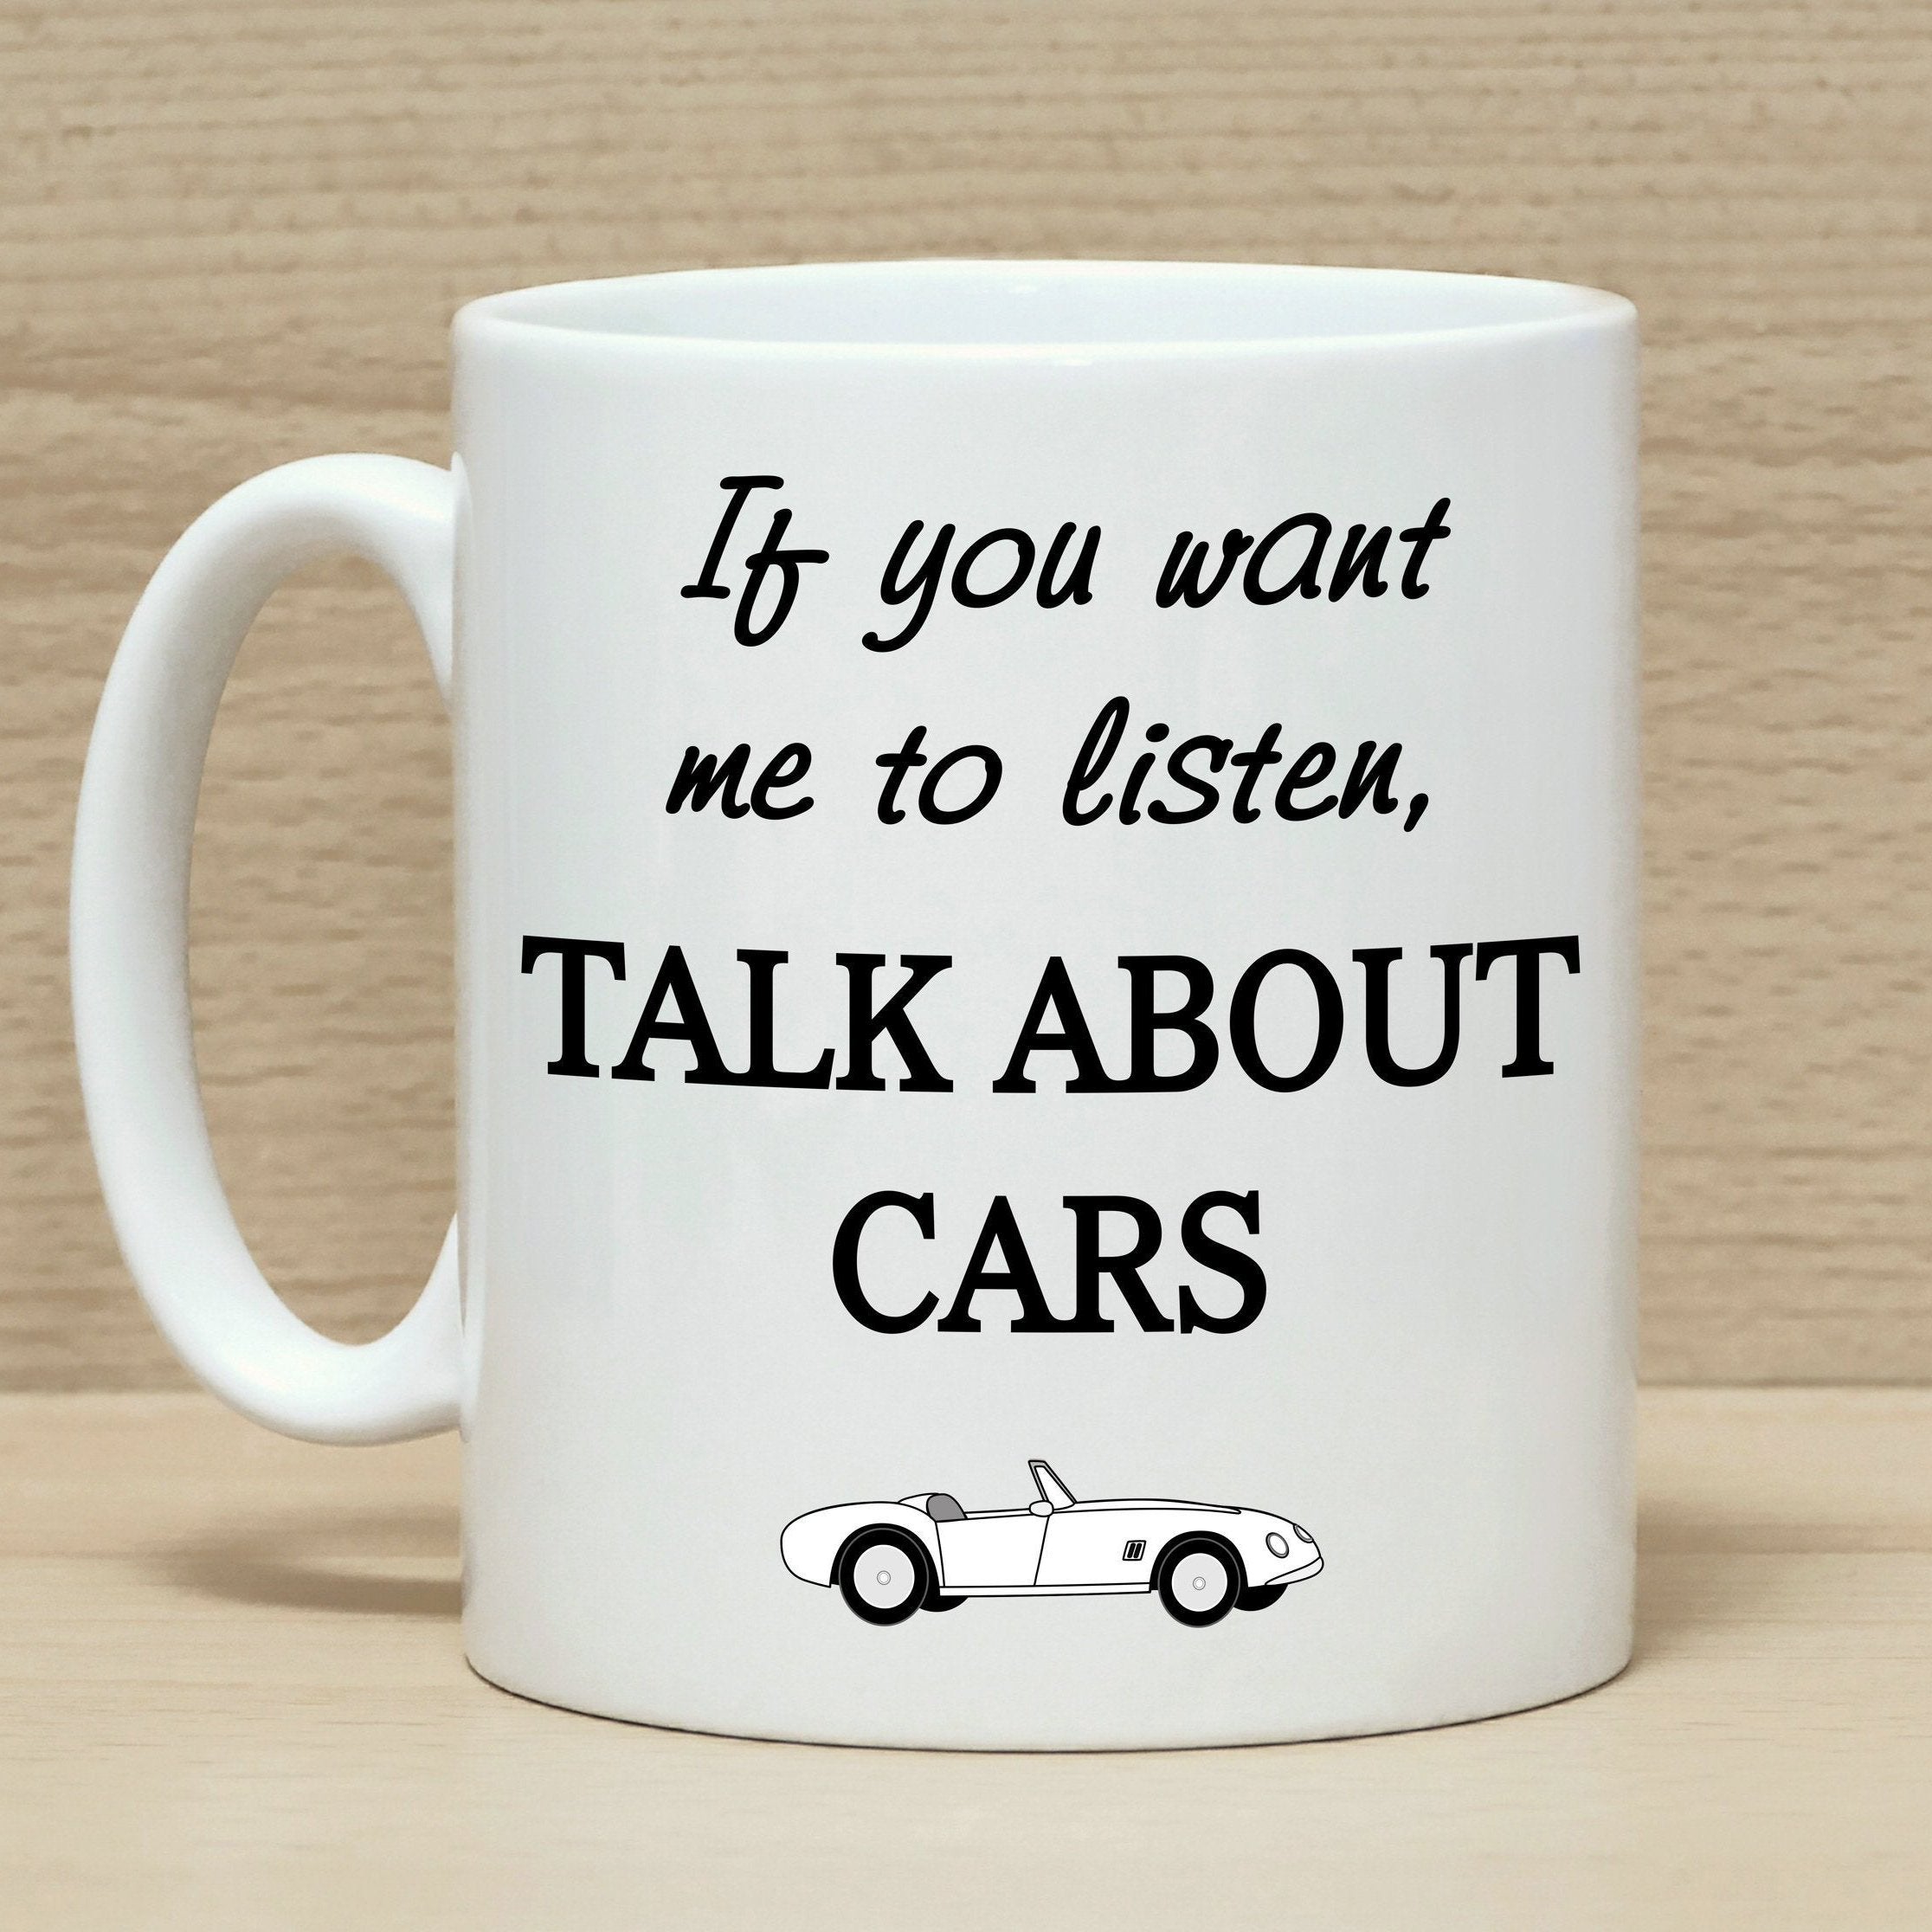 If you want me to listen talk about car car lovers coffee mug - Vista Stars  - Personalized gifts for the loved ones